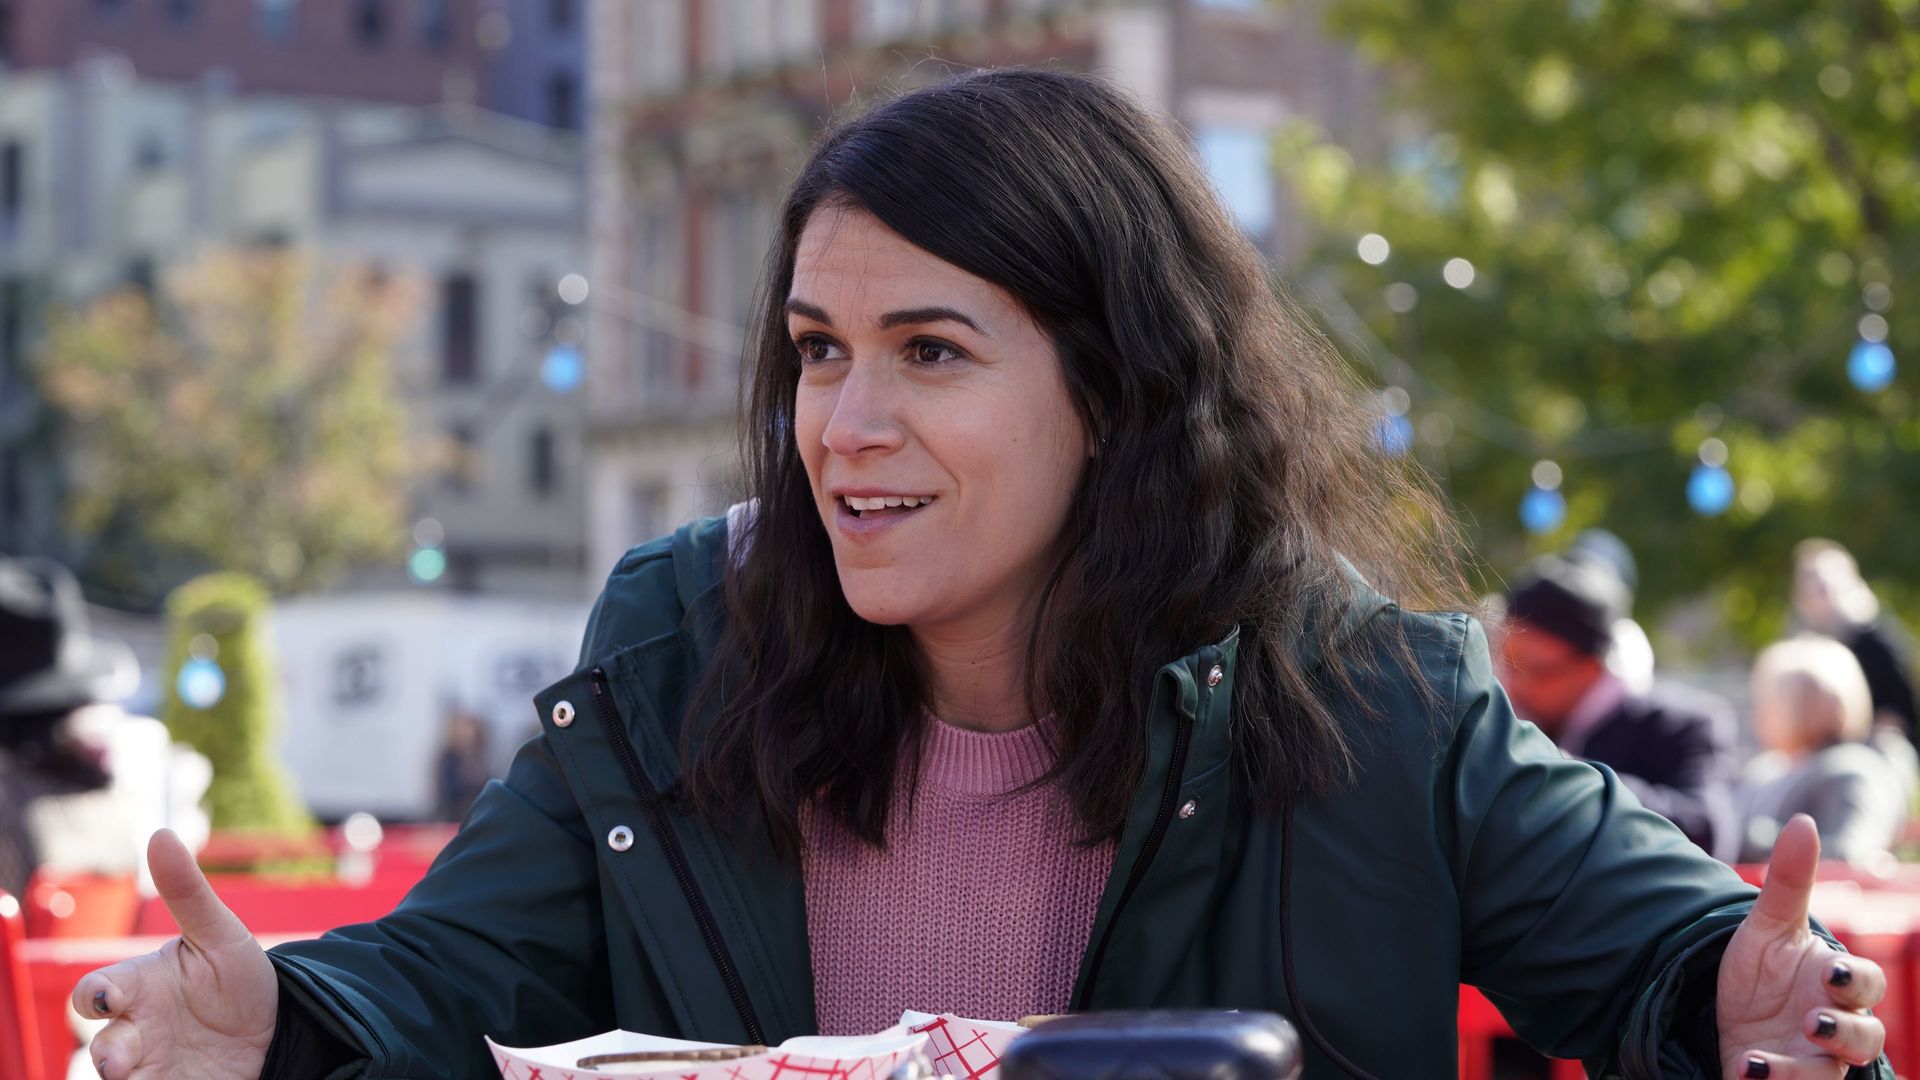 Broad City background